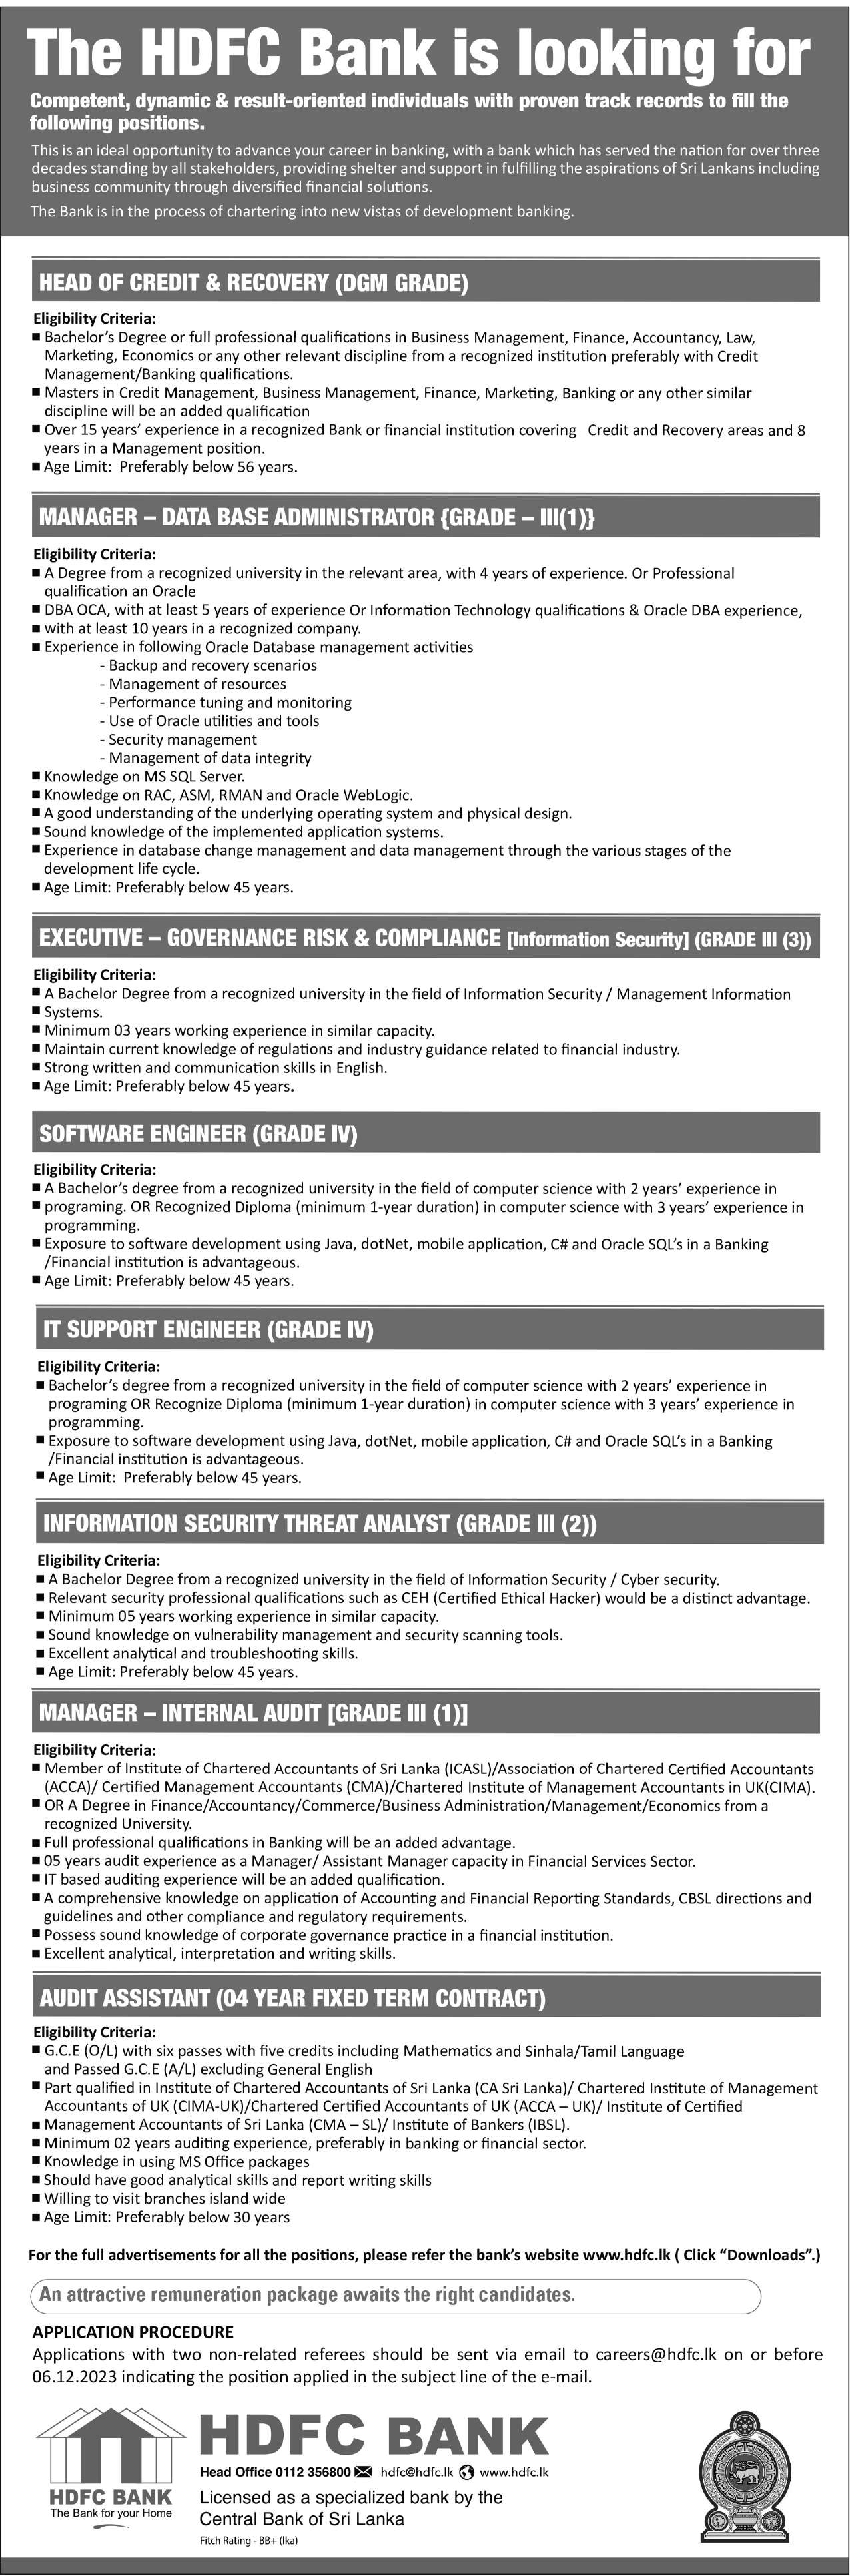 Head of Credit and recovery, Manager, Executive, software Engineer,  IT Support Engineer, Information Security Threat Analysis, Manager, Audit Assistant